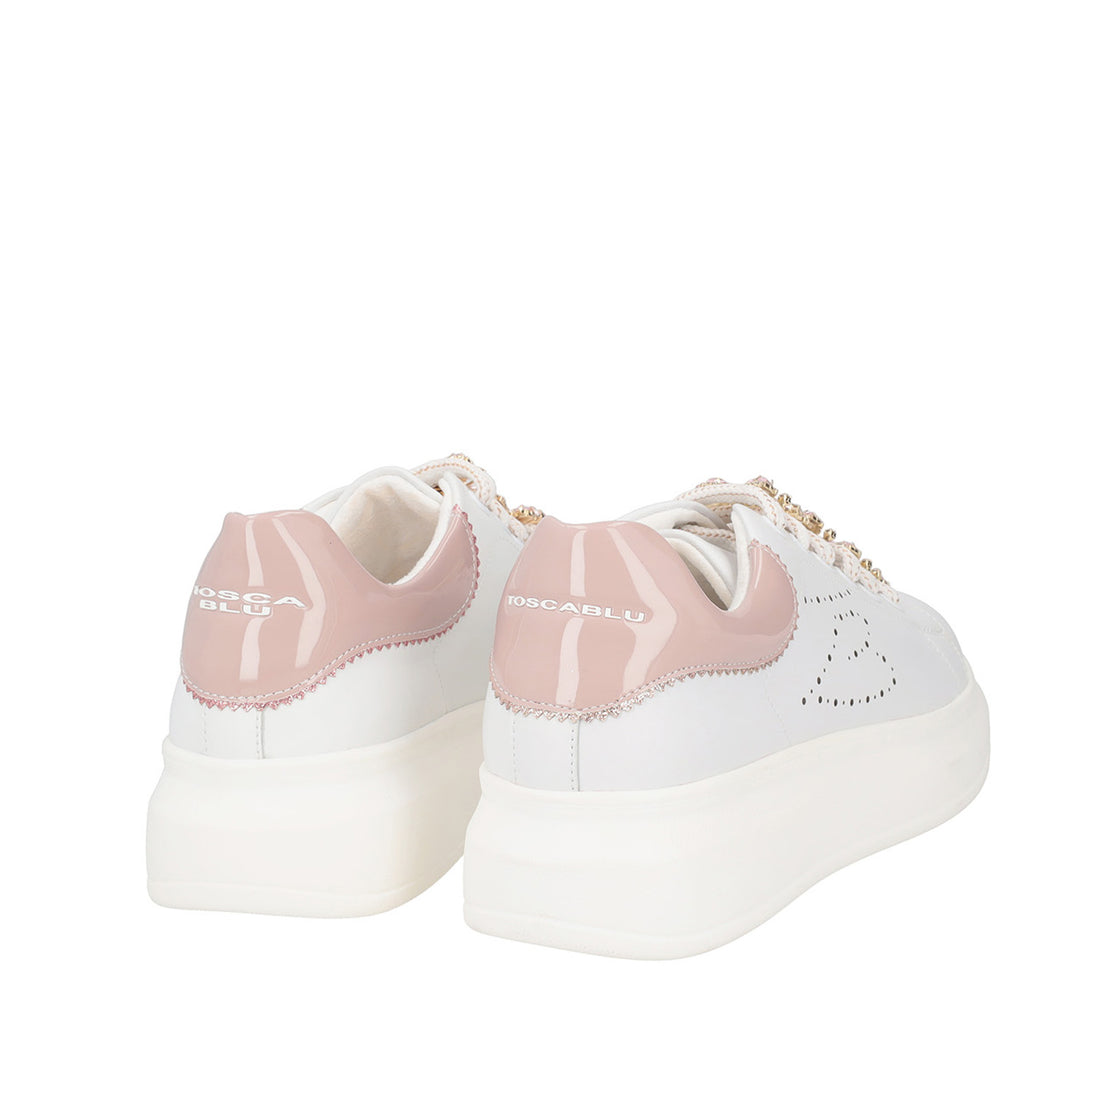 WHITE/CIPRIA GLAMOUR SNEAKER WITH BUTTERFLY ACCESSORY